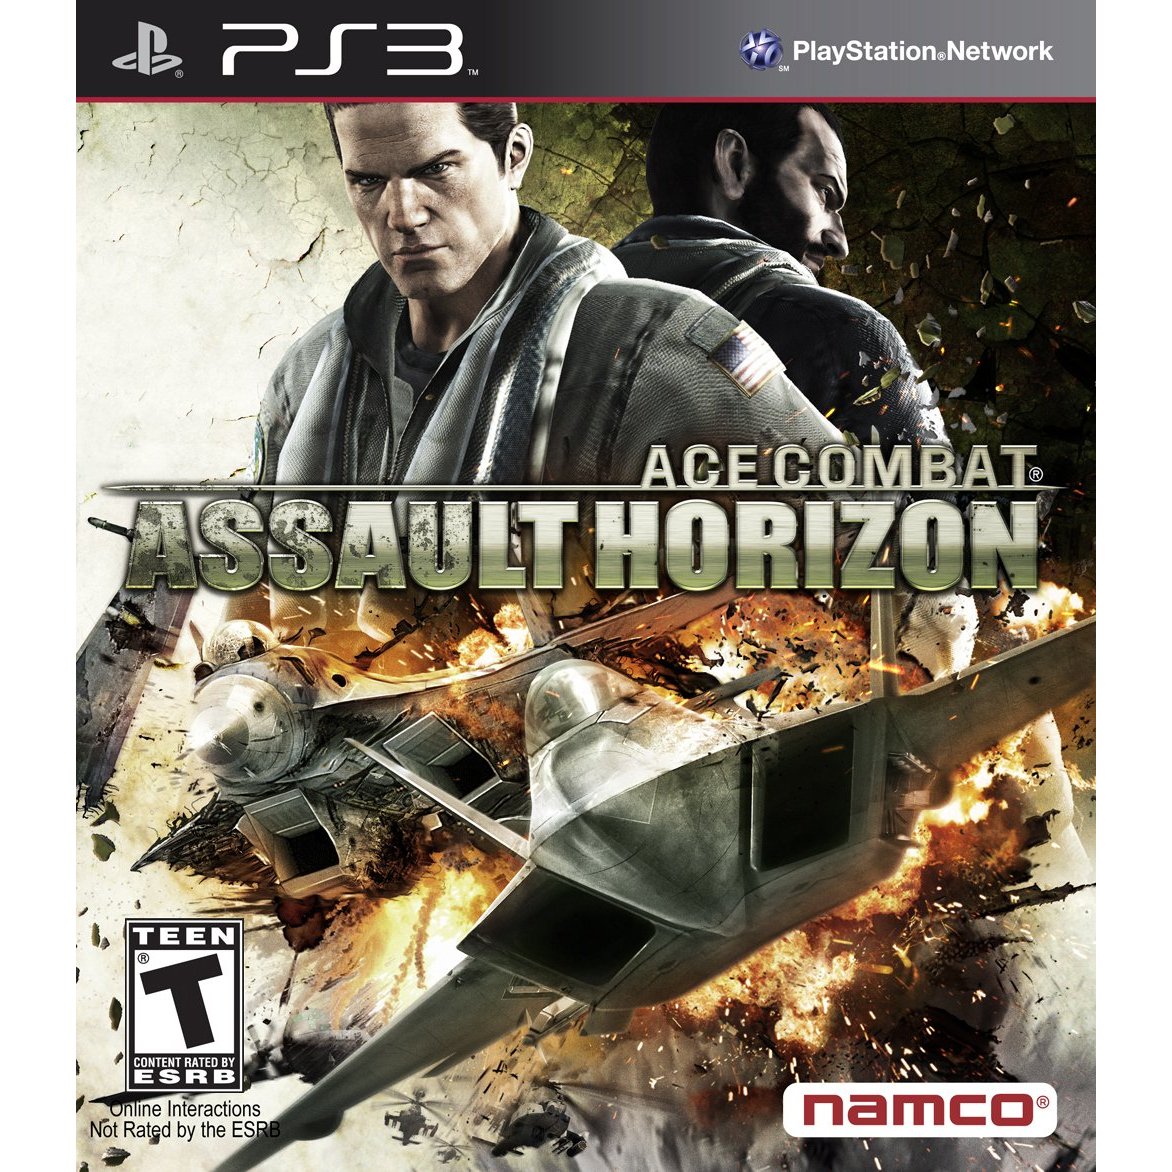 http://thetechjournal.com/wp-content/uploads/images/1111/1320296205-ace-combat-assault-horizon--game-for-playstation-3--1.jpg